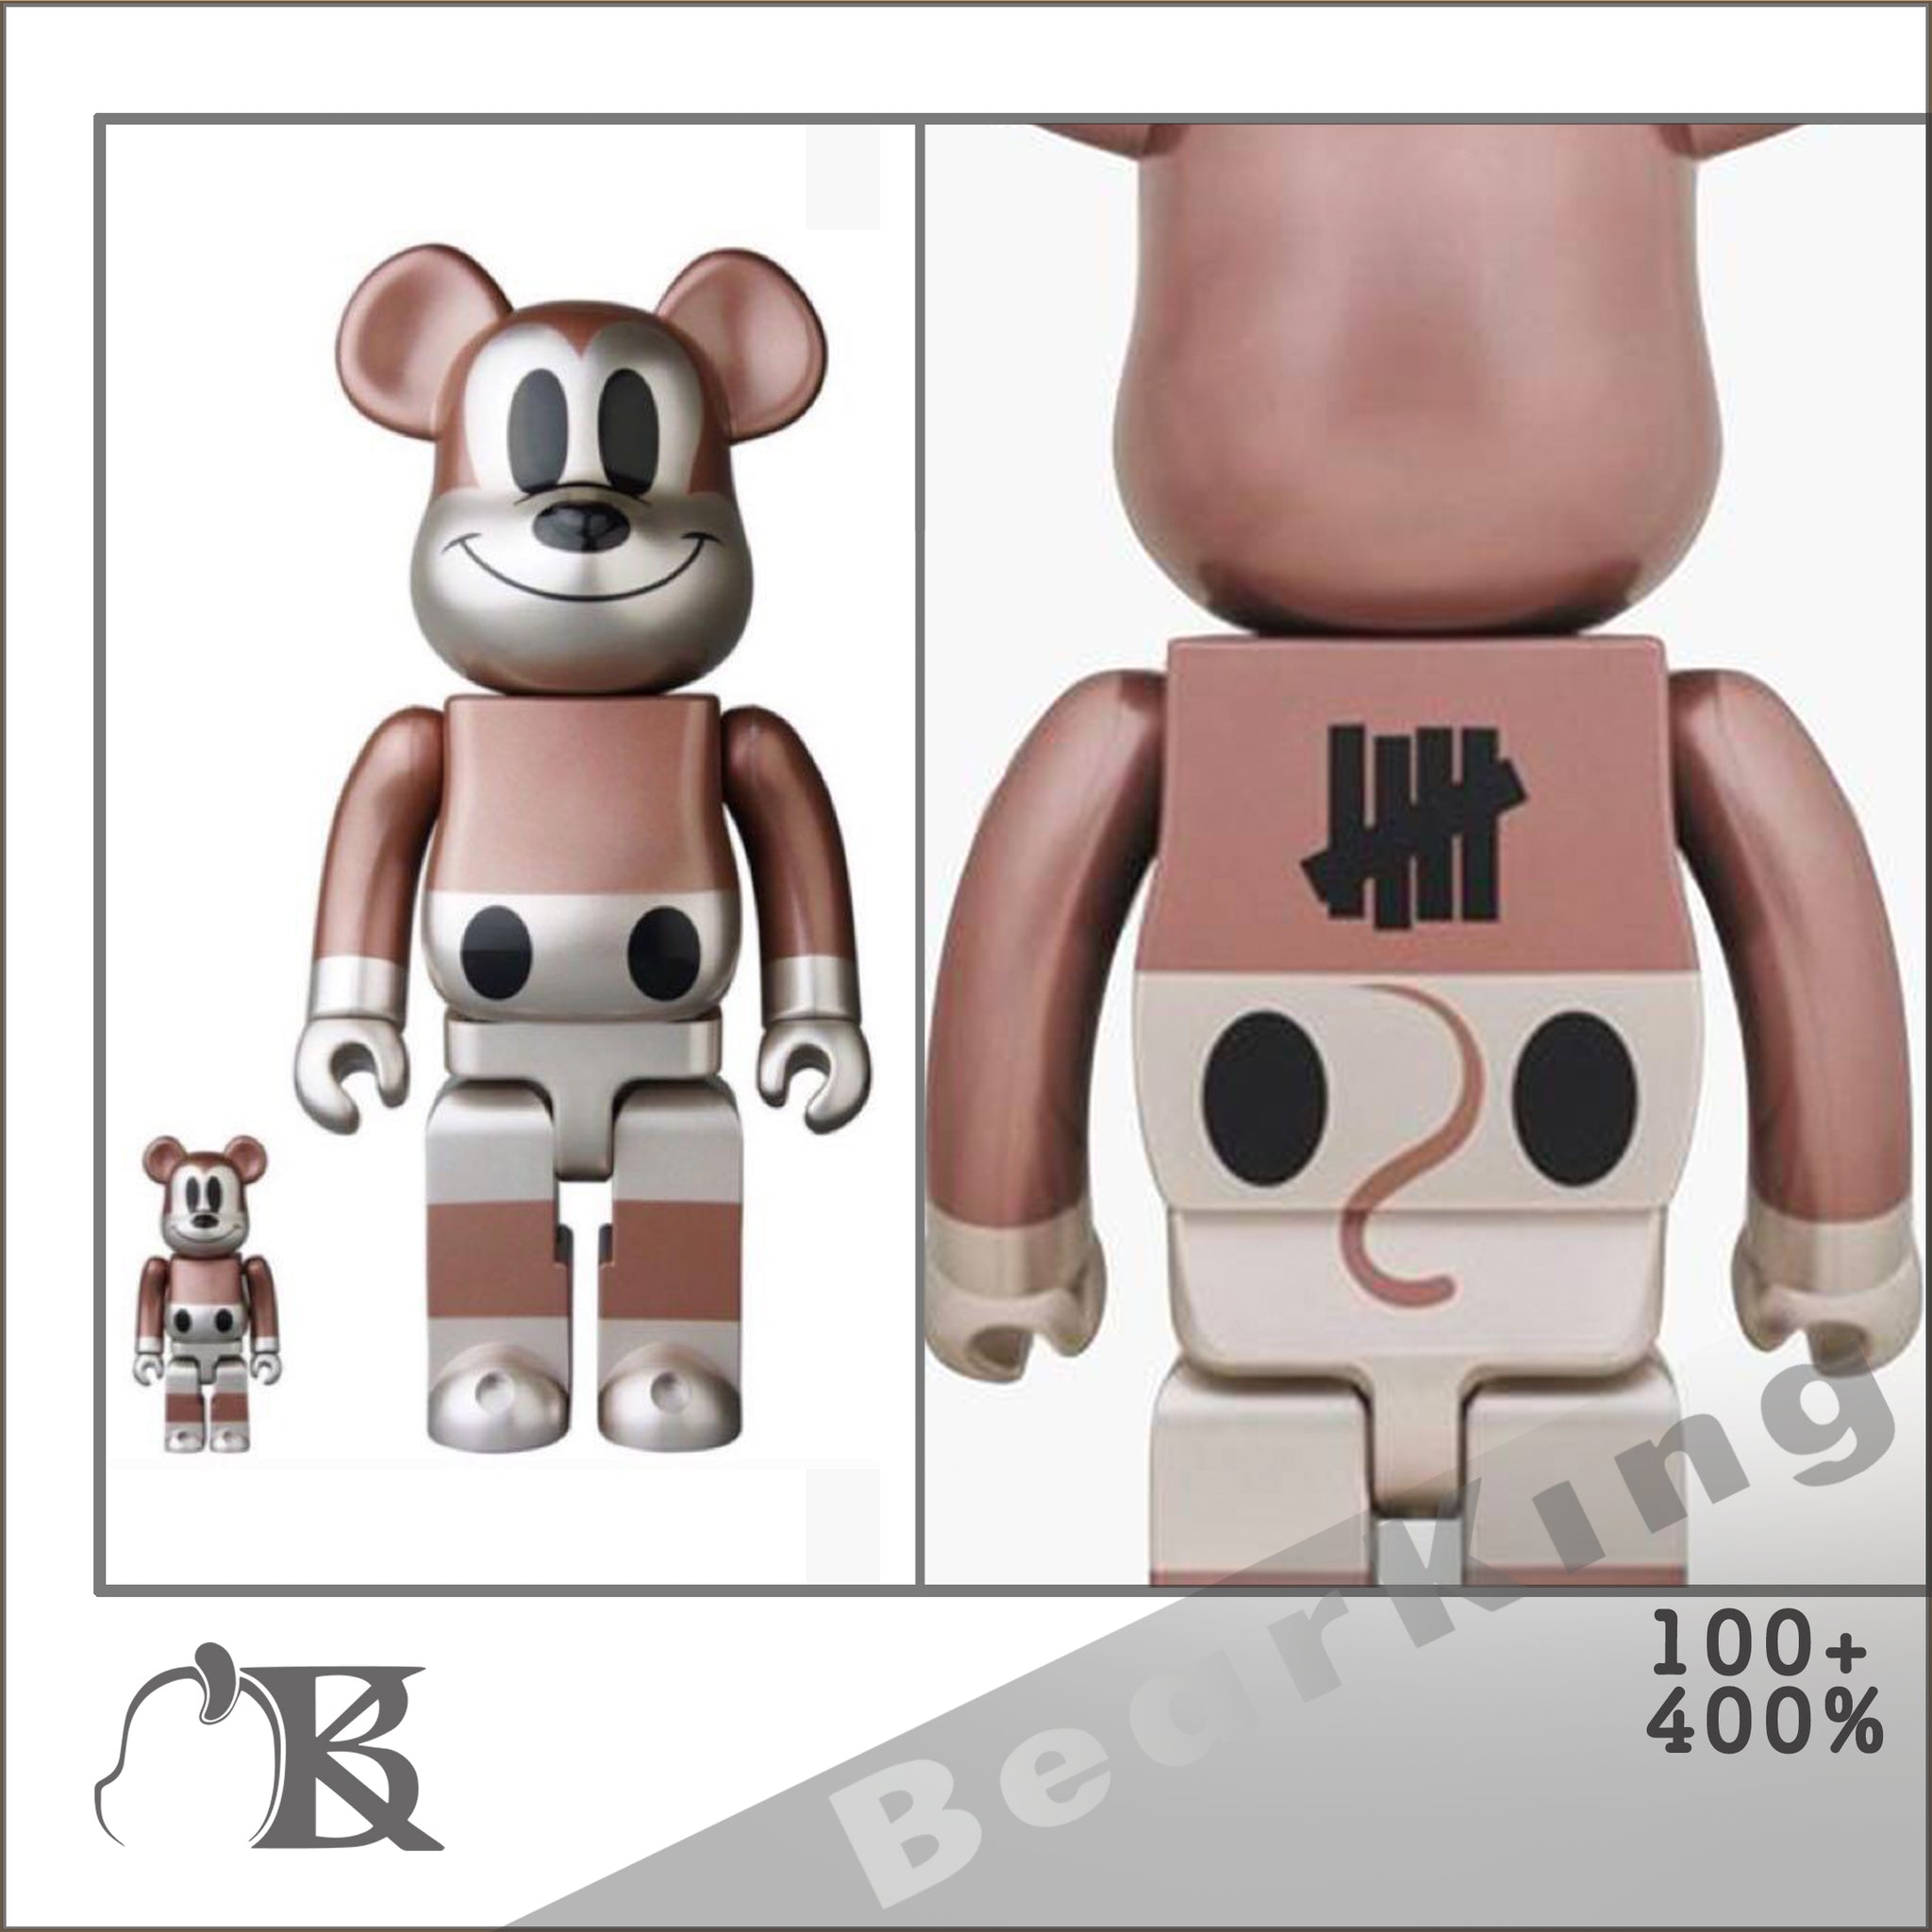 BE@RBRICK UNDEFEATED MICKEY MOUSE 400％+100% 電鍍